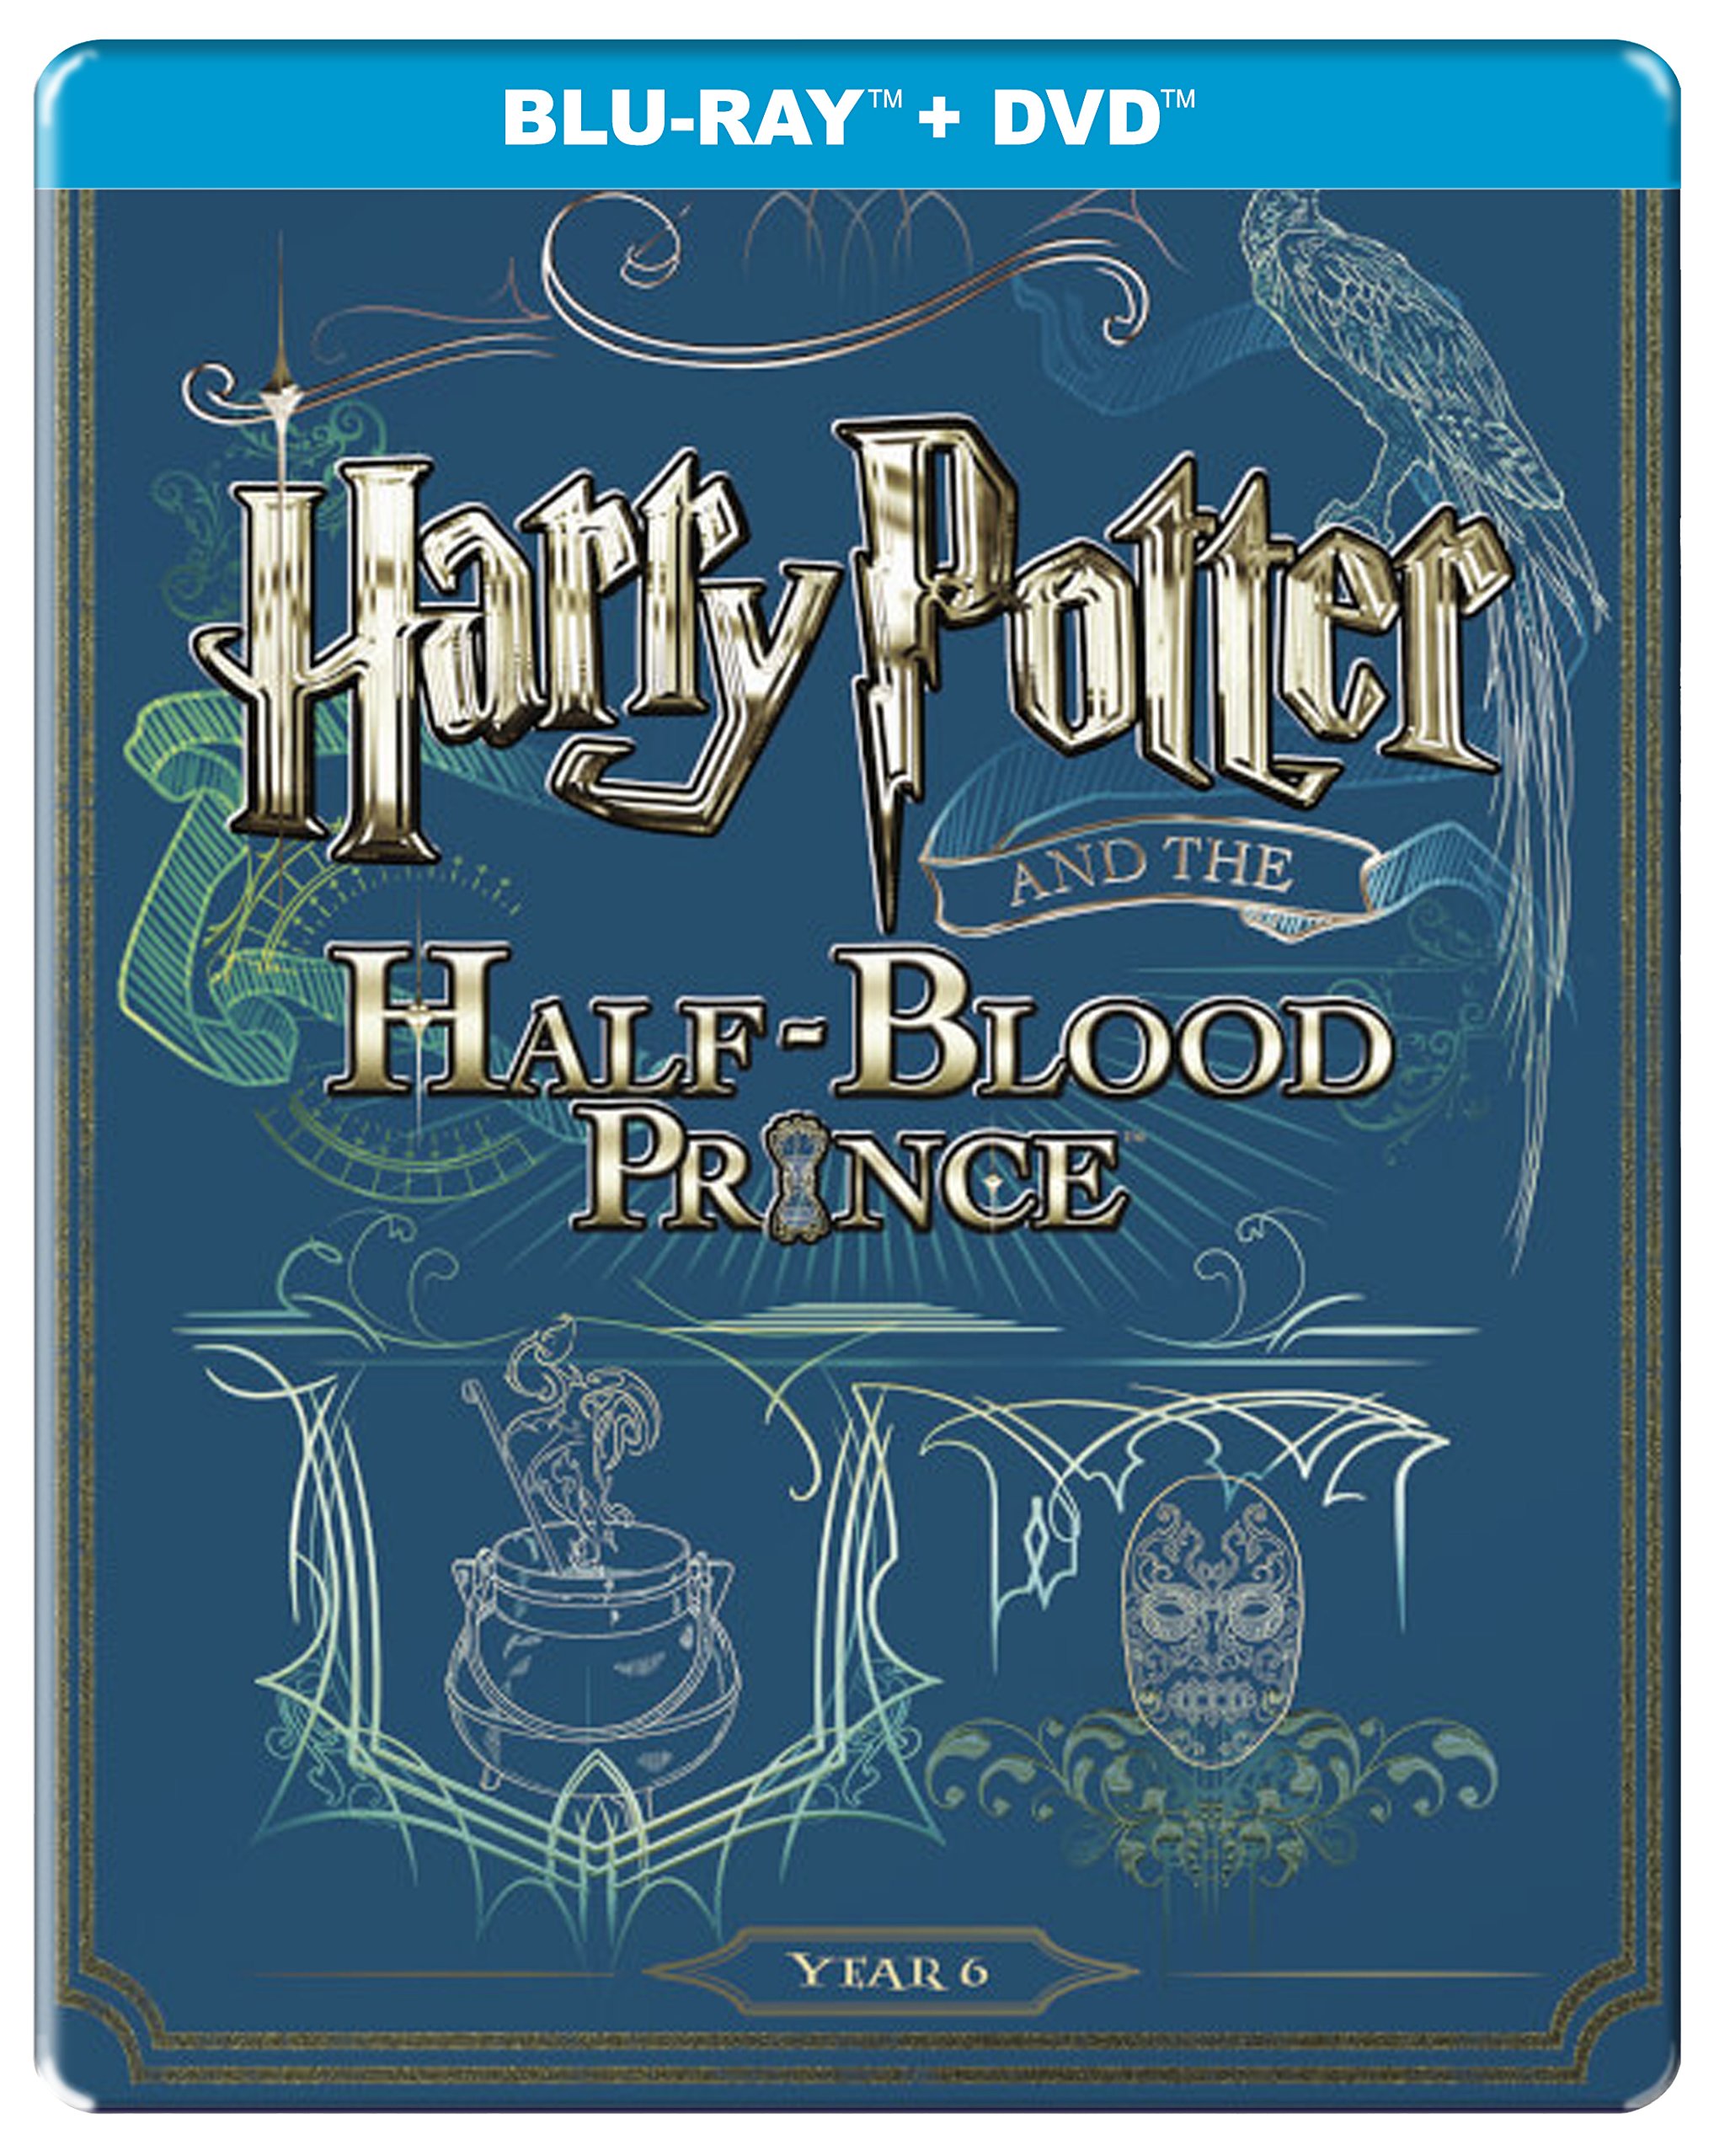 harry-potter-and-the-half-blood-prince-2009-year-6-steelbook-blu-ray-dvd-2-disc